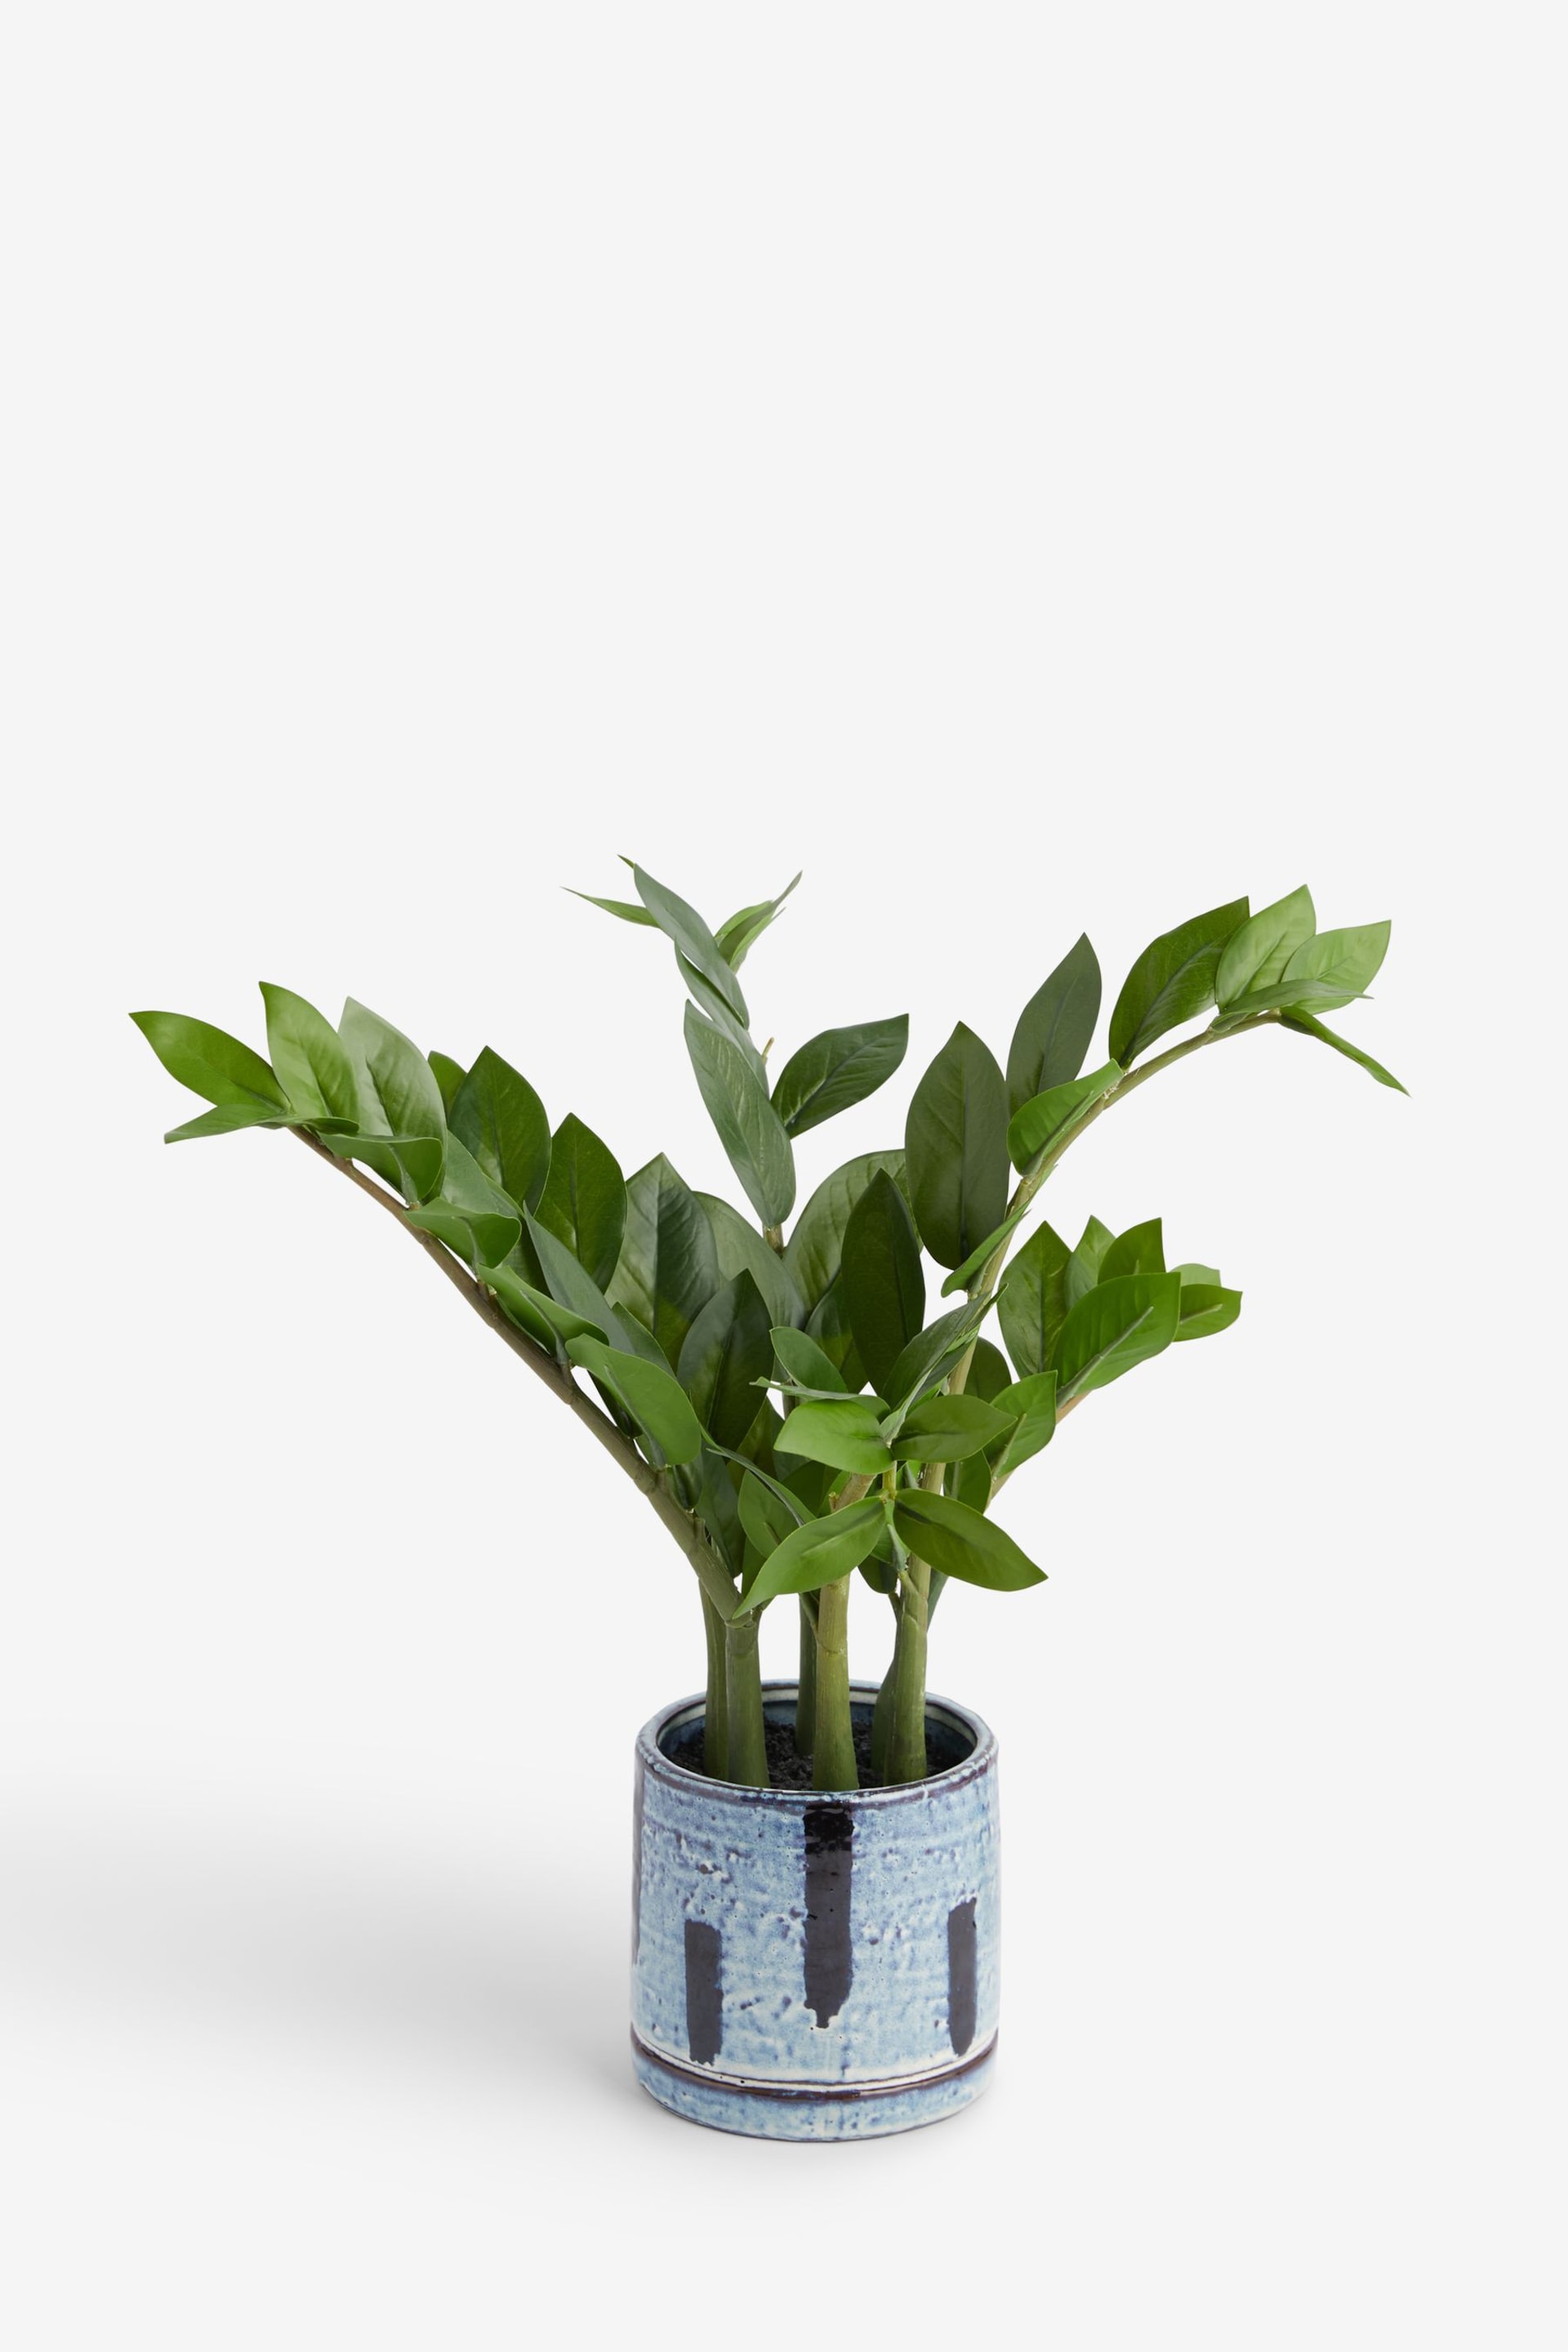 Green Artificial Rubber Plant In Monochrome Pot - Image 1 of 5